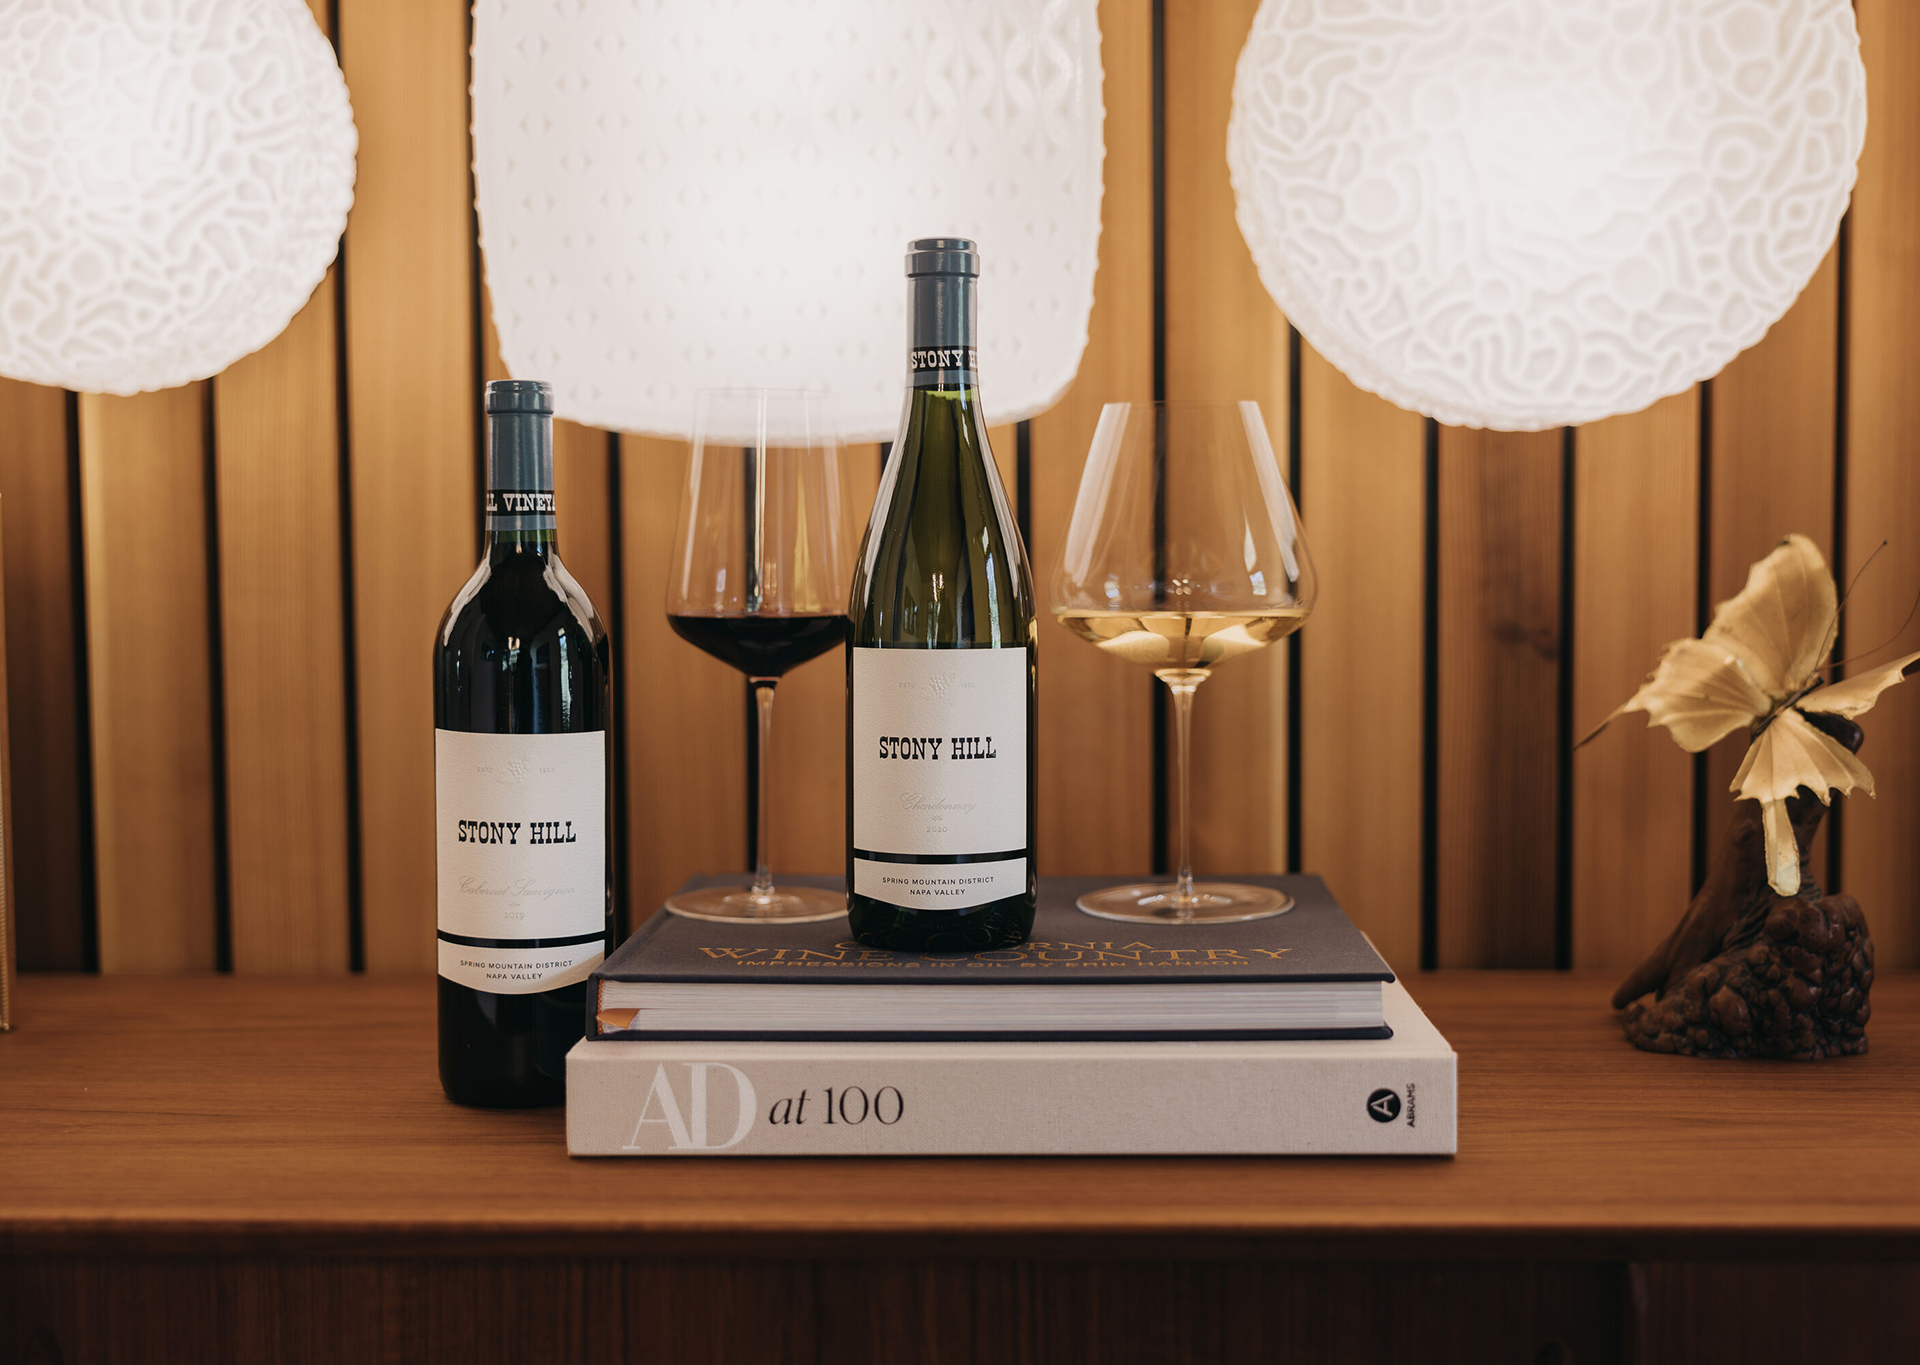 Treasures From the Cellar: A bottle of 2019 Stony Hill Cabernet Sauvignon, and 2020 Stony Hill Chardonnay on a table with a stack of books and two glasses of wine.